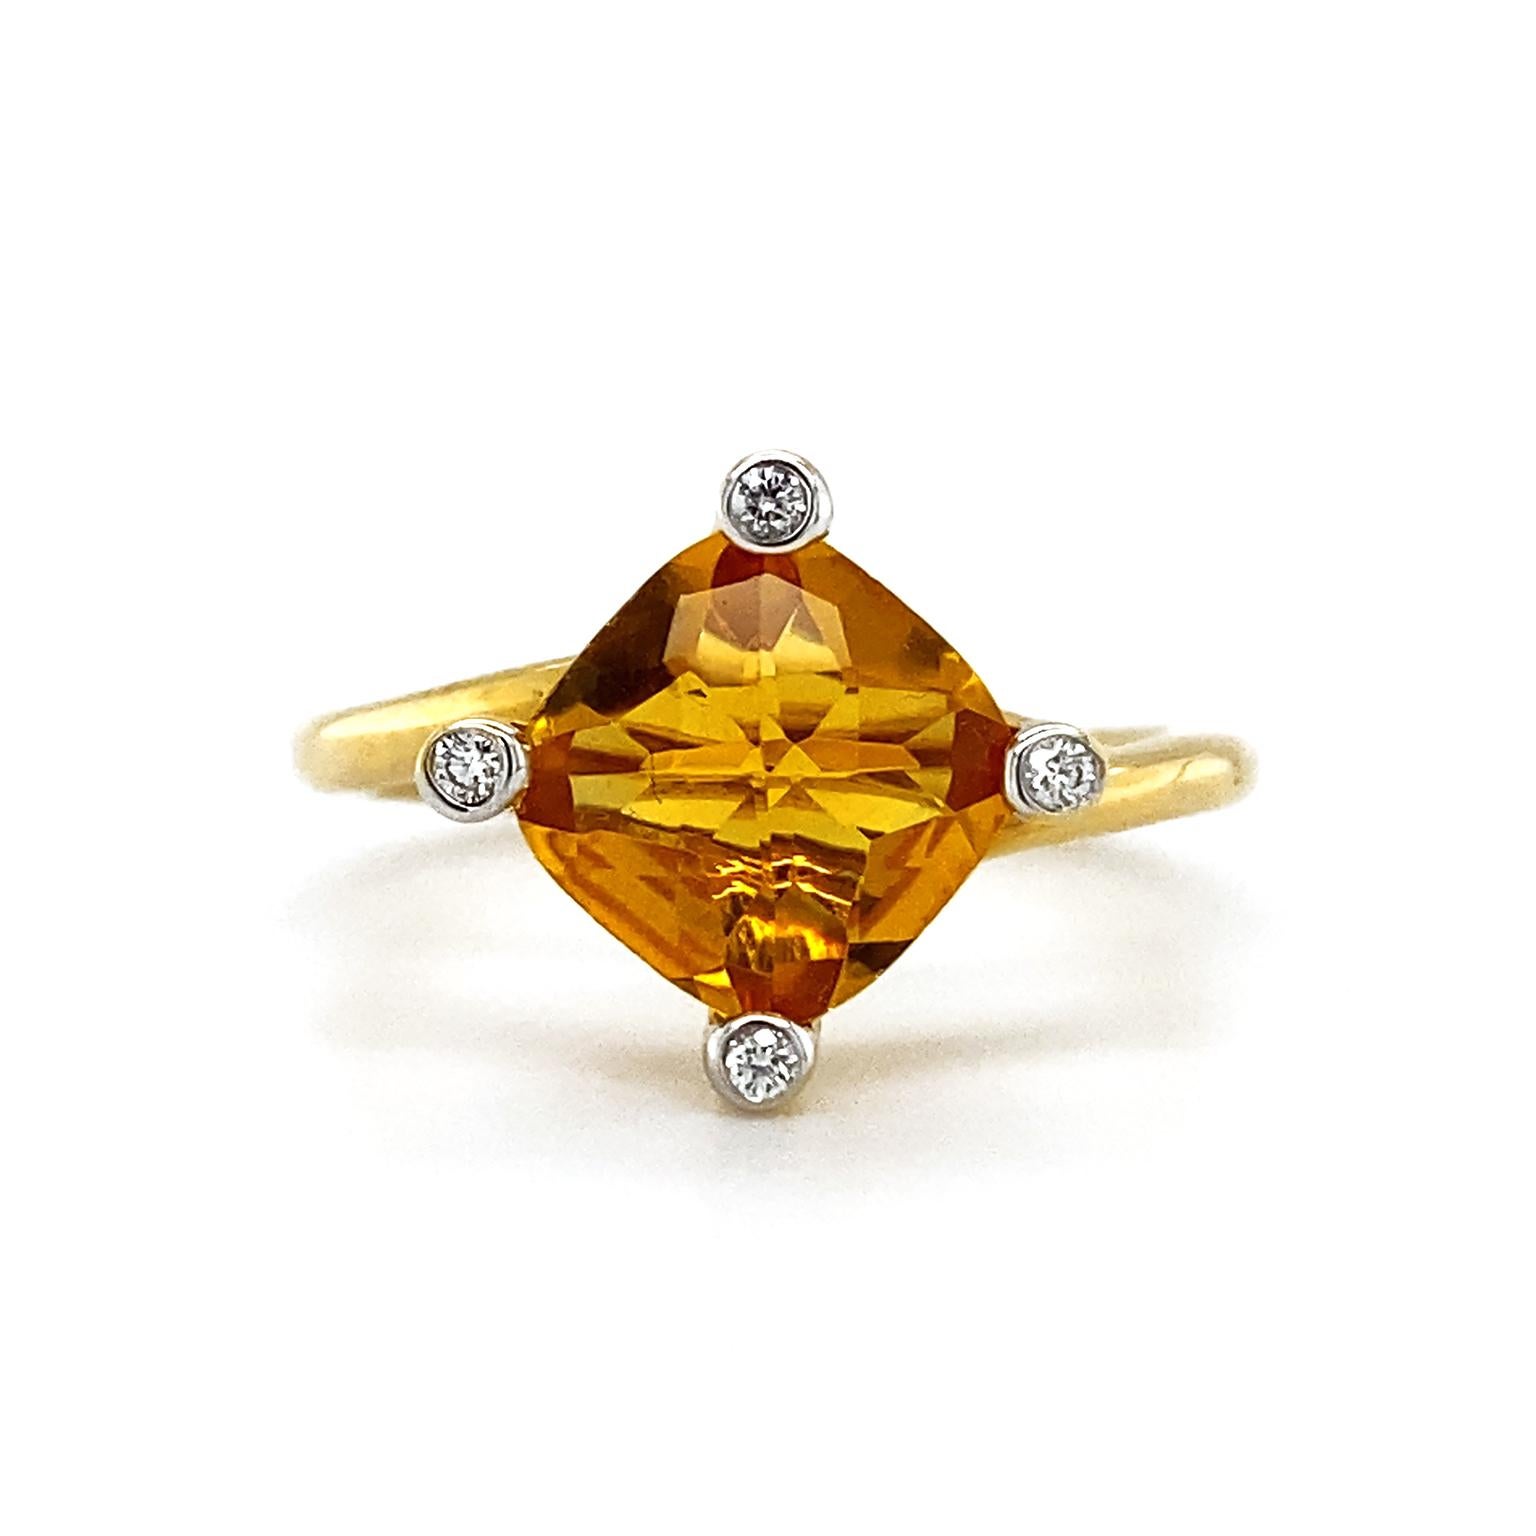 A lustrous cushion cut citrine is heightened with four bezel set brilliant cut diamonds on each corner. An 18k yellow gold band is oblique as the finishing touch. The weight of the citrine is 1.84 carats and the diamonds weigh a total of .04 carats.